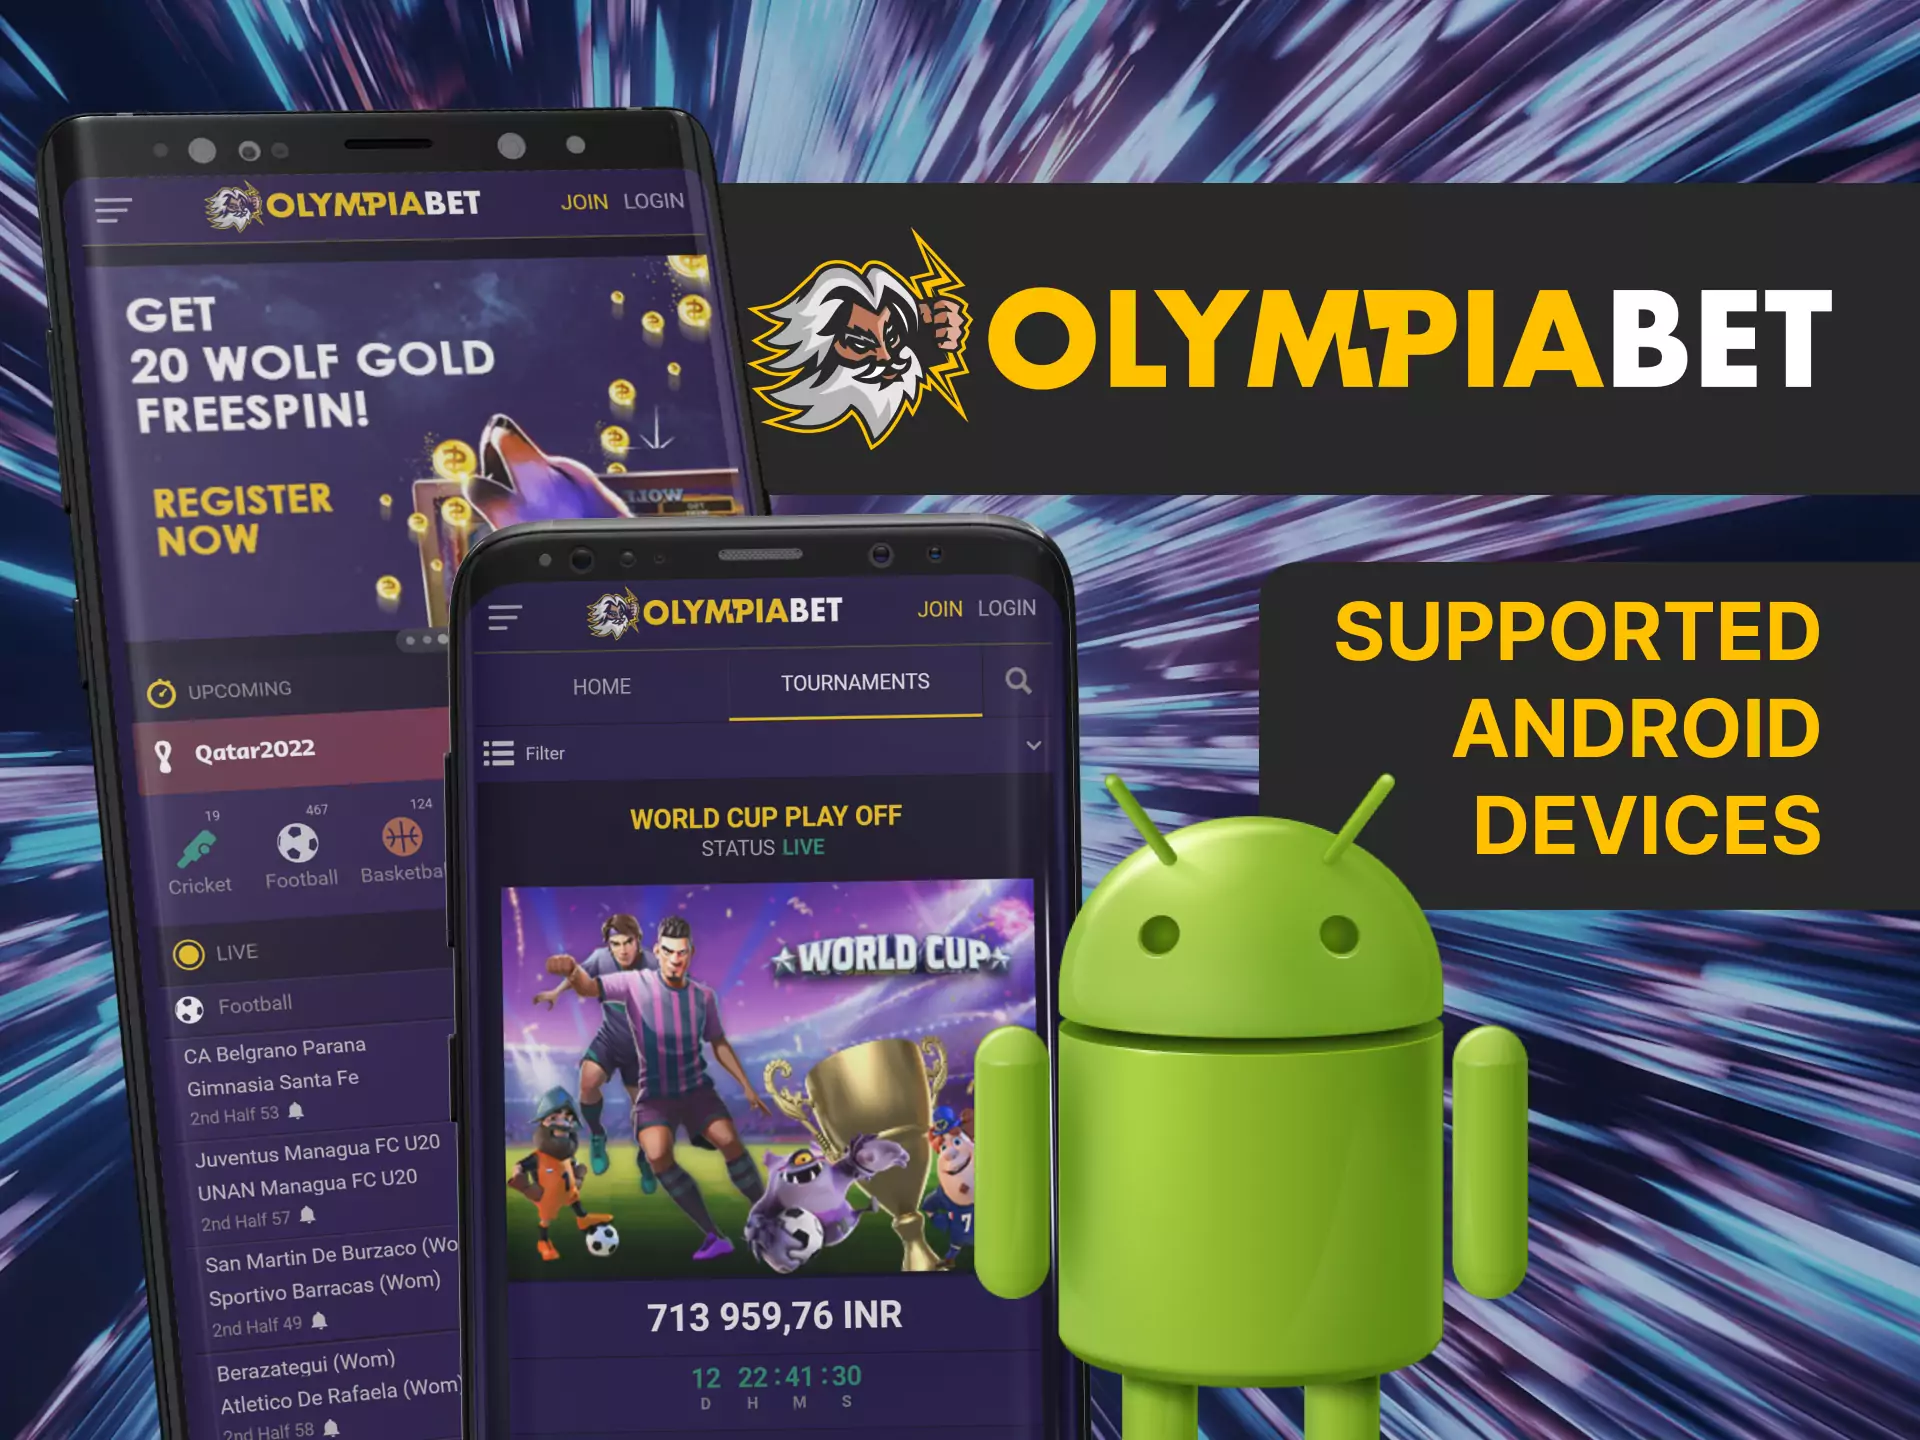 The OlympiaBet app is available to players with various Android devices.